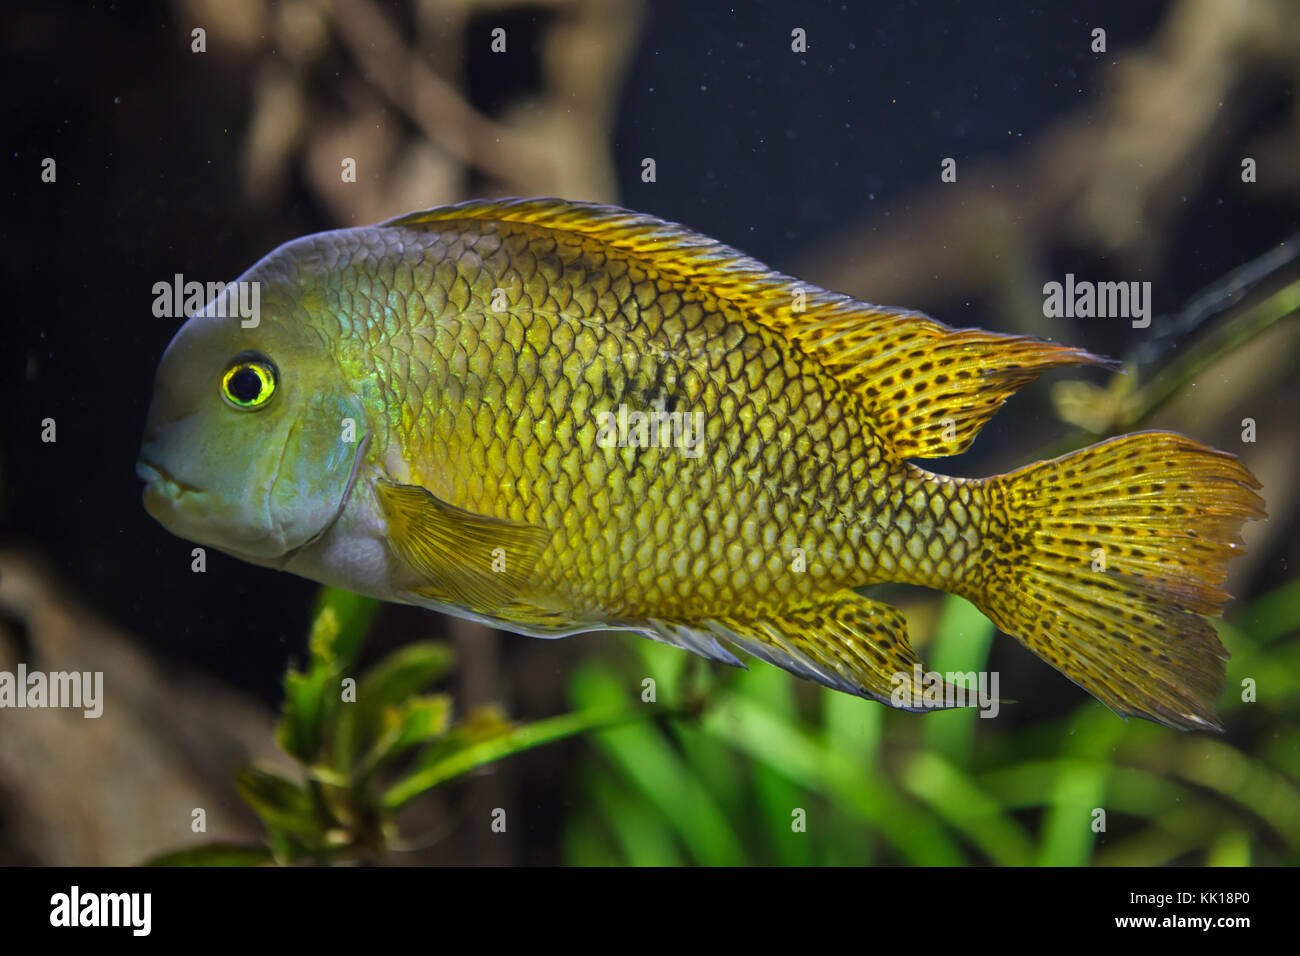 Moga (Hypsophrys nicaraguensis), also known as the nickie or parrot cichlid. Stock Photo